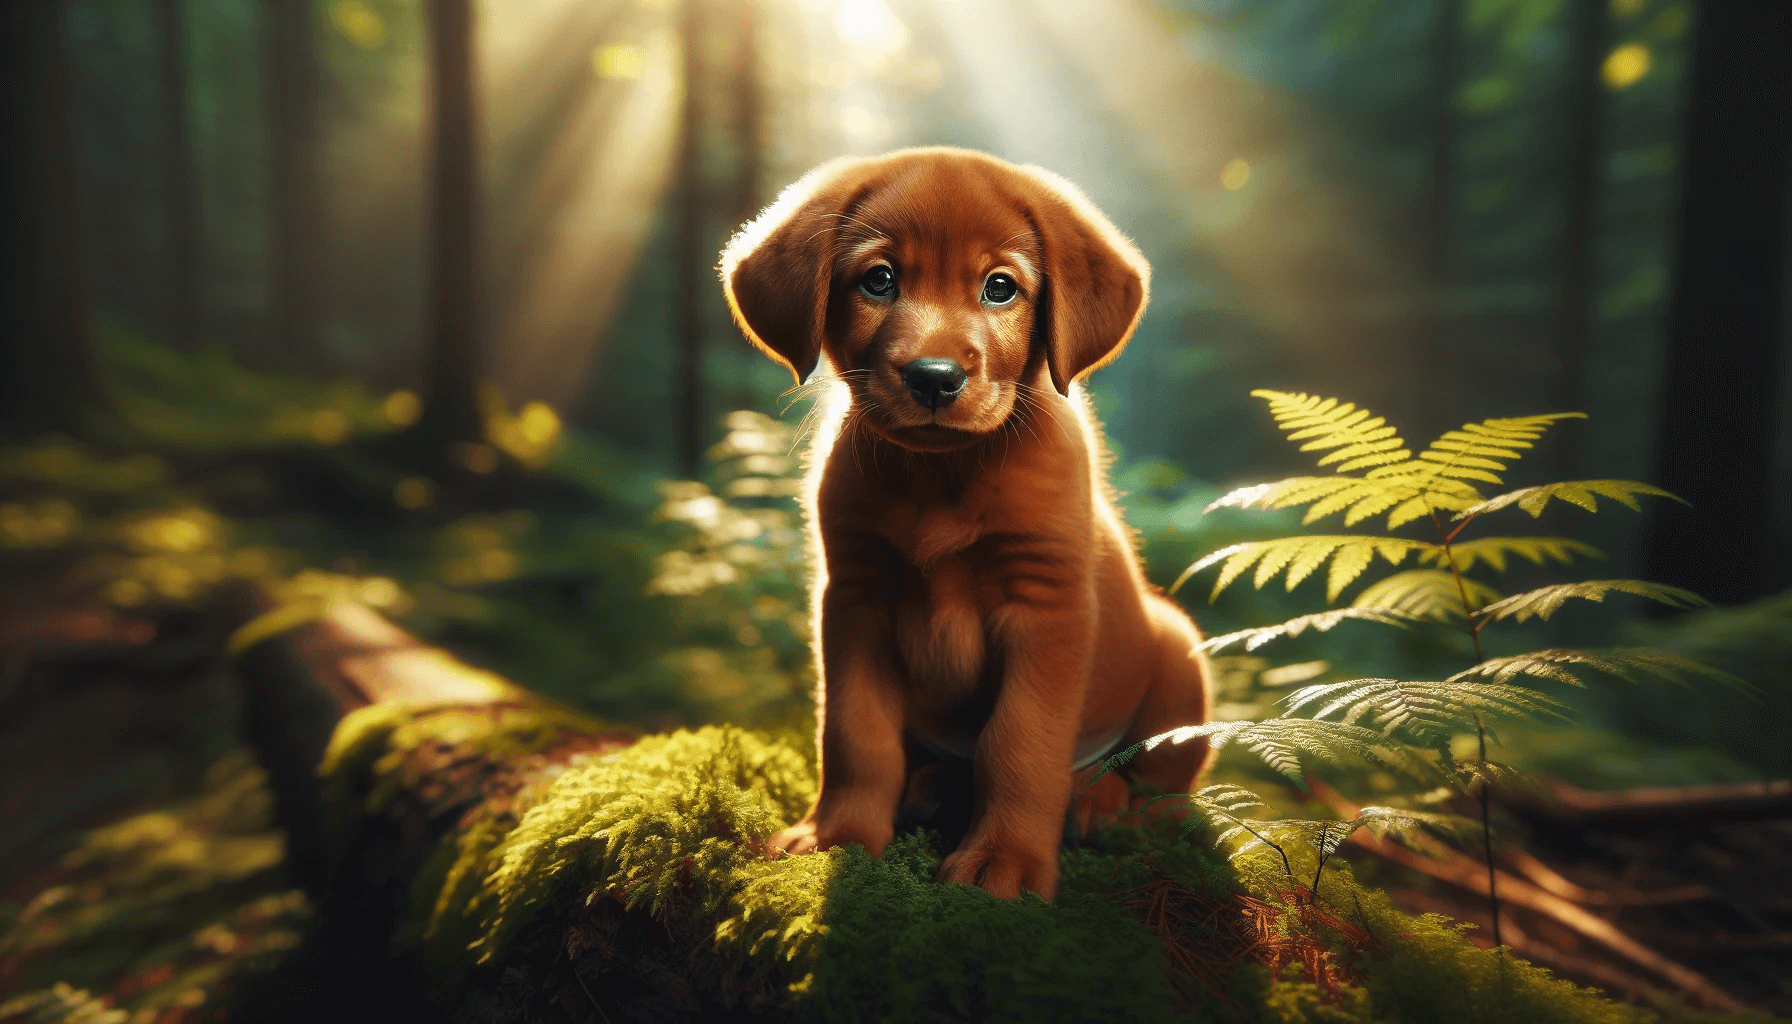 A Red Fox Labrador puppy with a glossy coat and expressive eyes sitting on a mossy rock in a sun-dappled forest. The scene is tranquil with soft beams of sunlight.